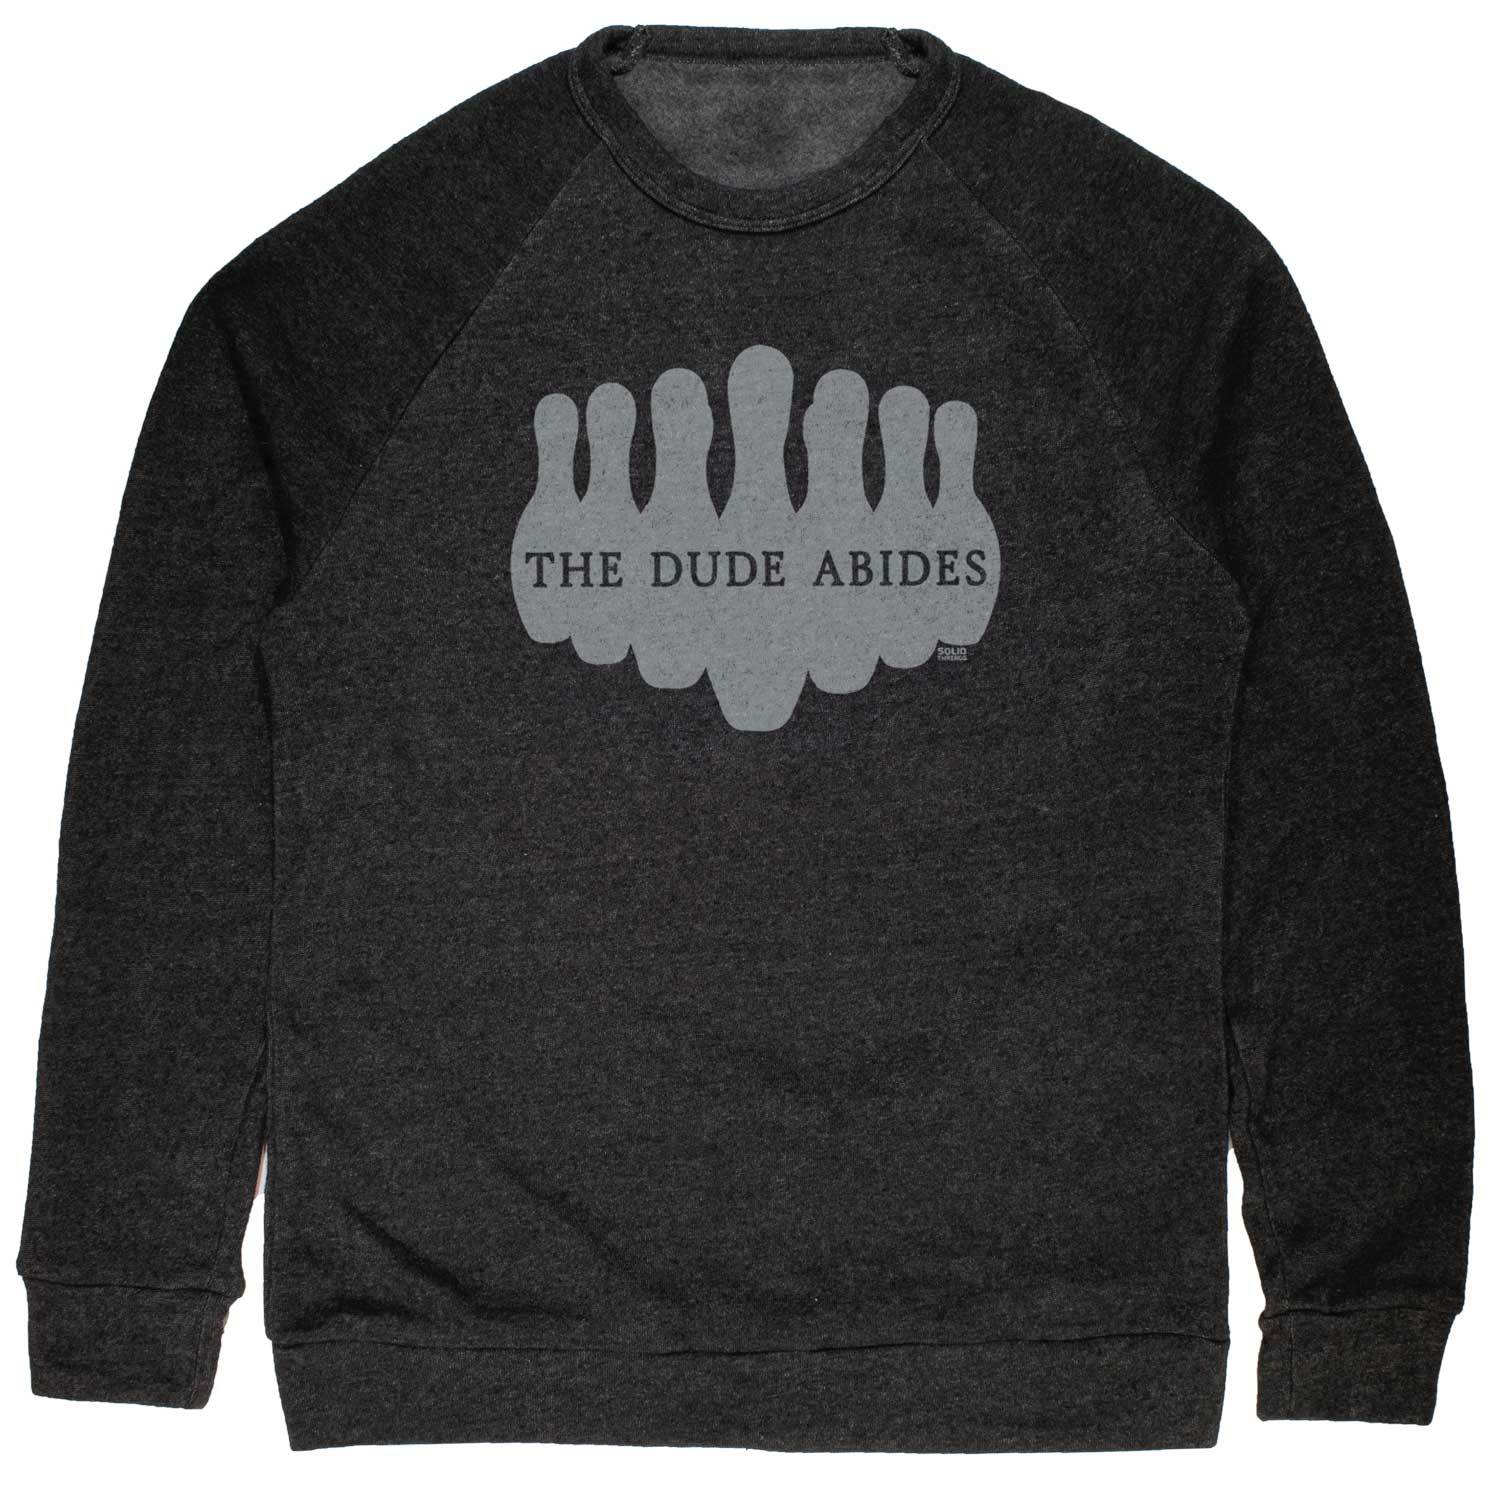 The Dude Abides Vintage Inspired Fleece Crewneck Sweatshirt with cool The Big Lebowski graphic | Solid Threads